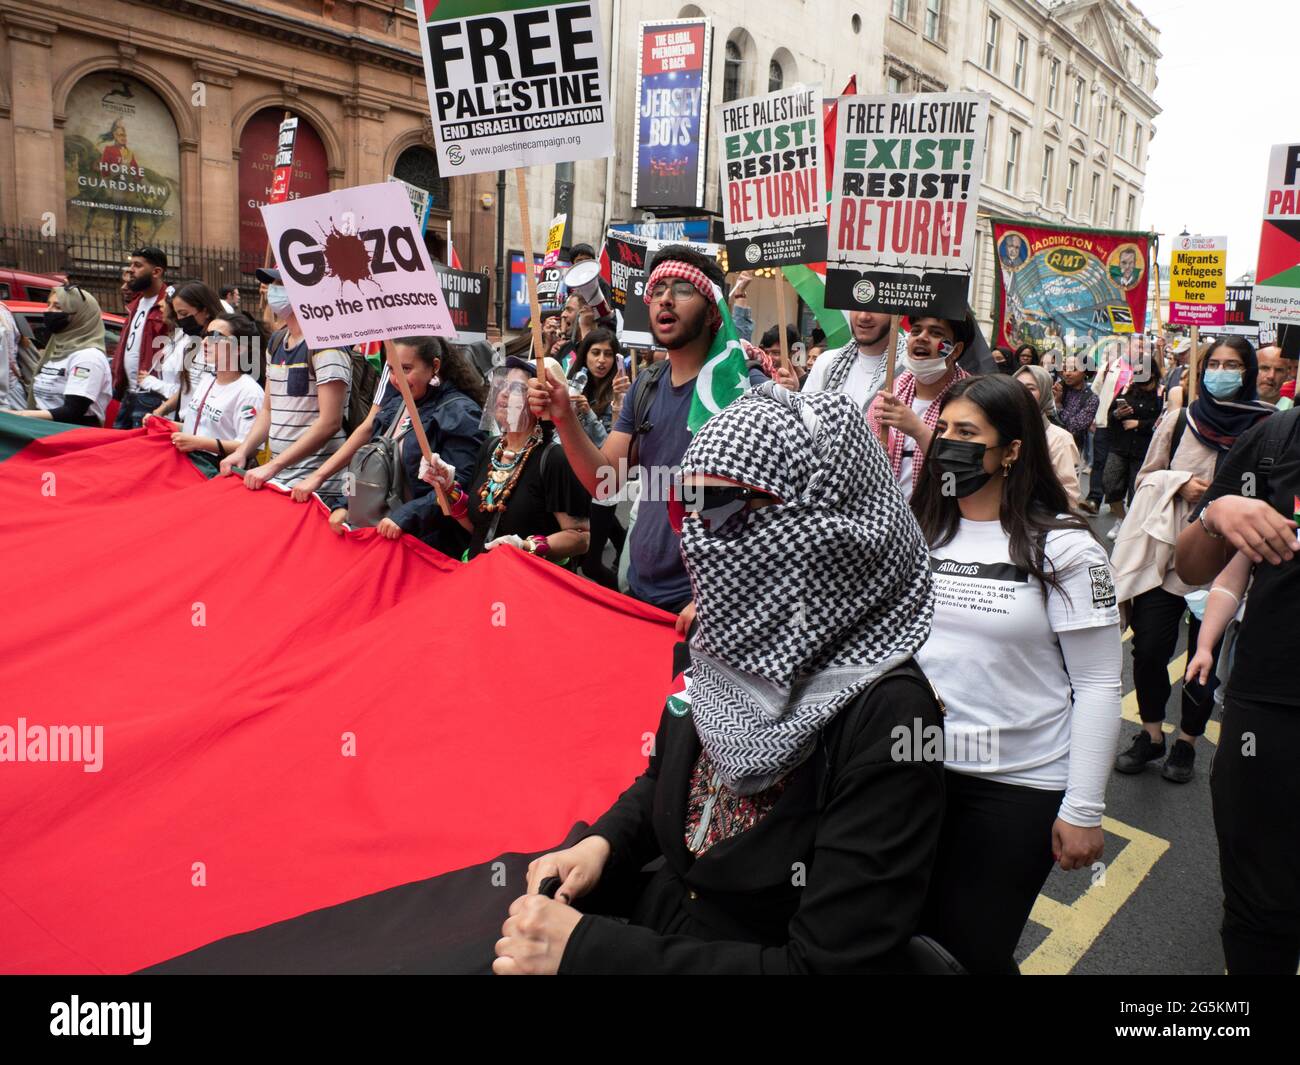 London protests, Activists protest in Central London at the People's Assembly National Demonstration, Free Palestine demonstrators with flag and placards Stock Photo